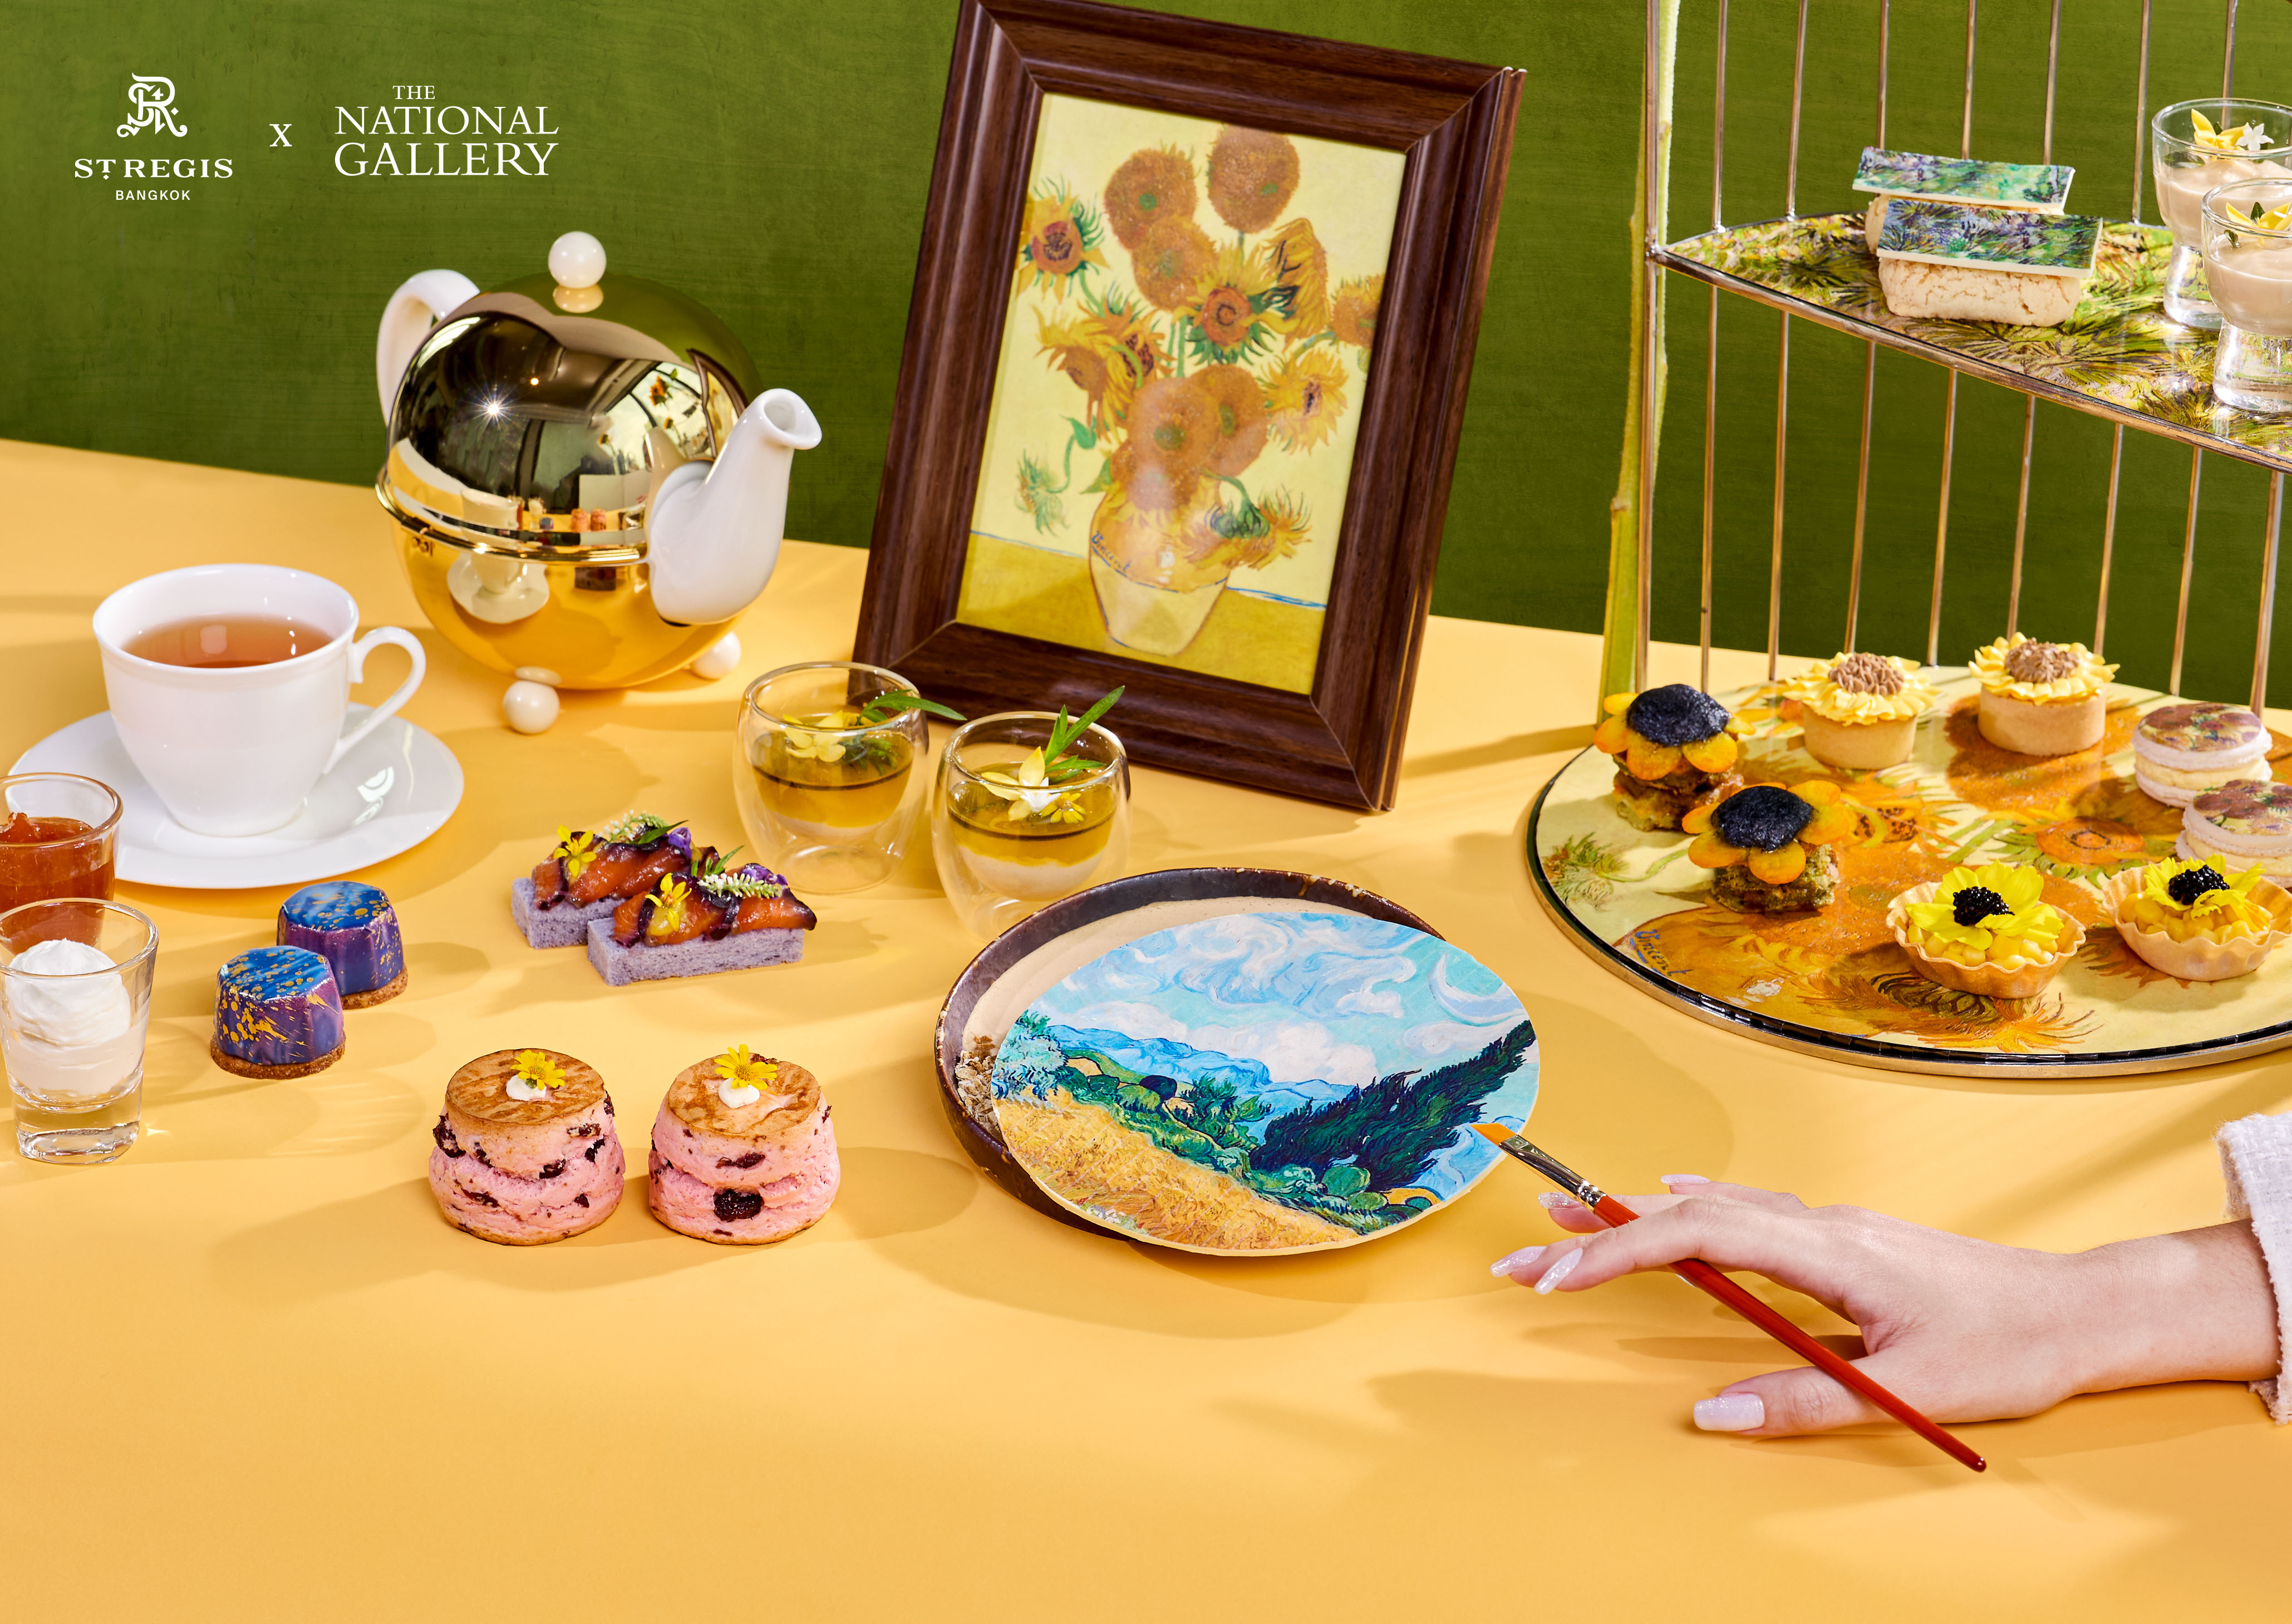 THAILAND’S FIRST VAN GOGH-INSPIRED AFTERNOON TEA  BY THE ST. REGIS BANGKOK